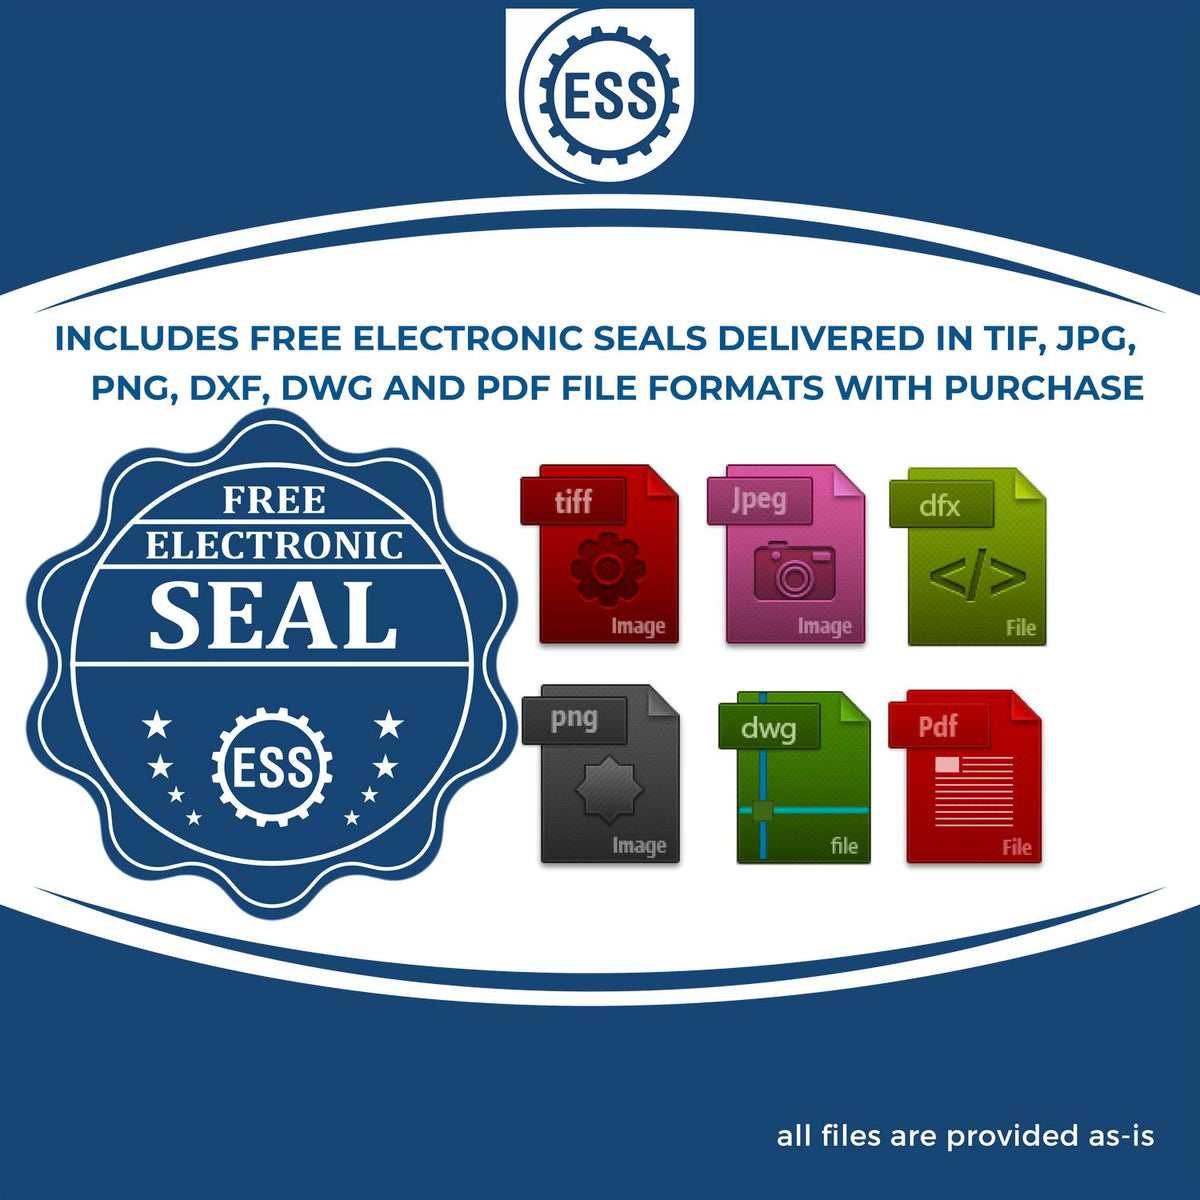 An infographic for the free electronic seal for the Slim Pre-Inked State Seal Notary Stamp for Kansas illustrating the different file type icons such as DXF, DWG, TIF, JPG and PNG.